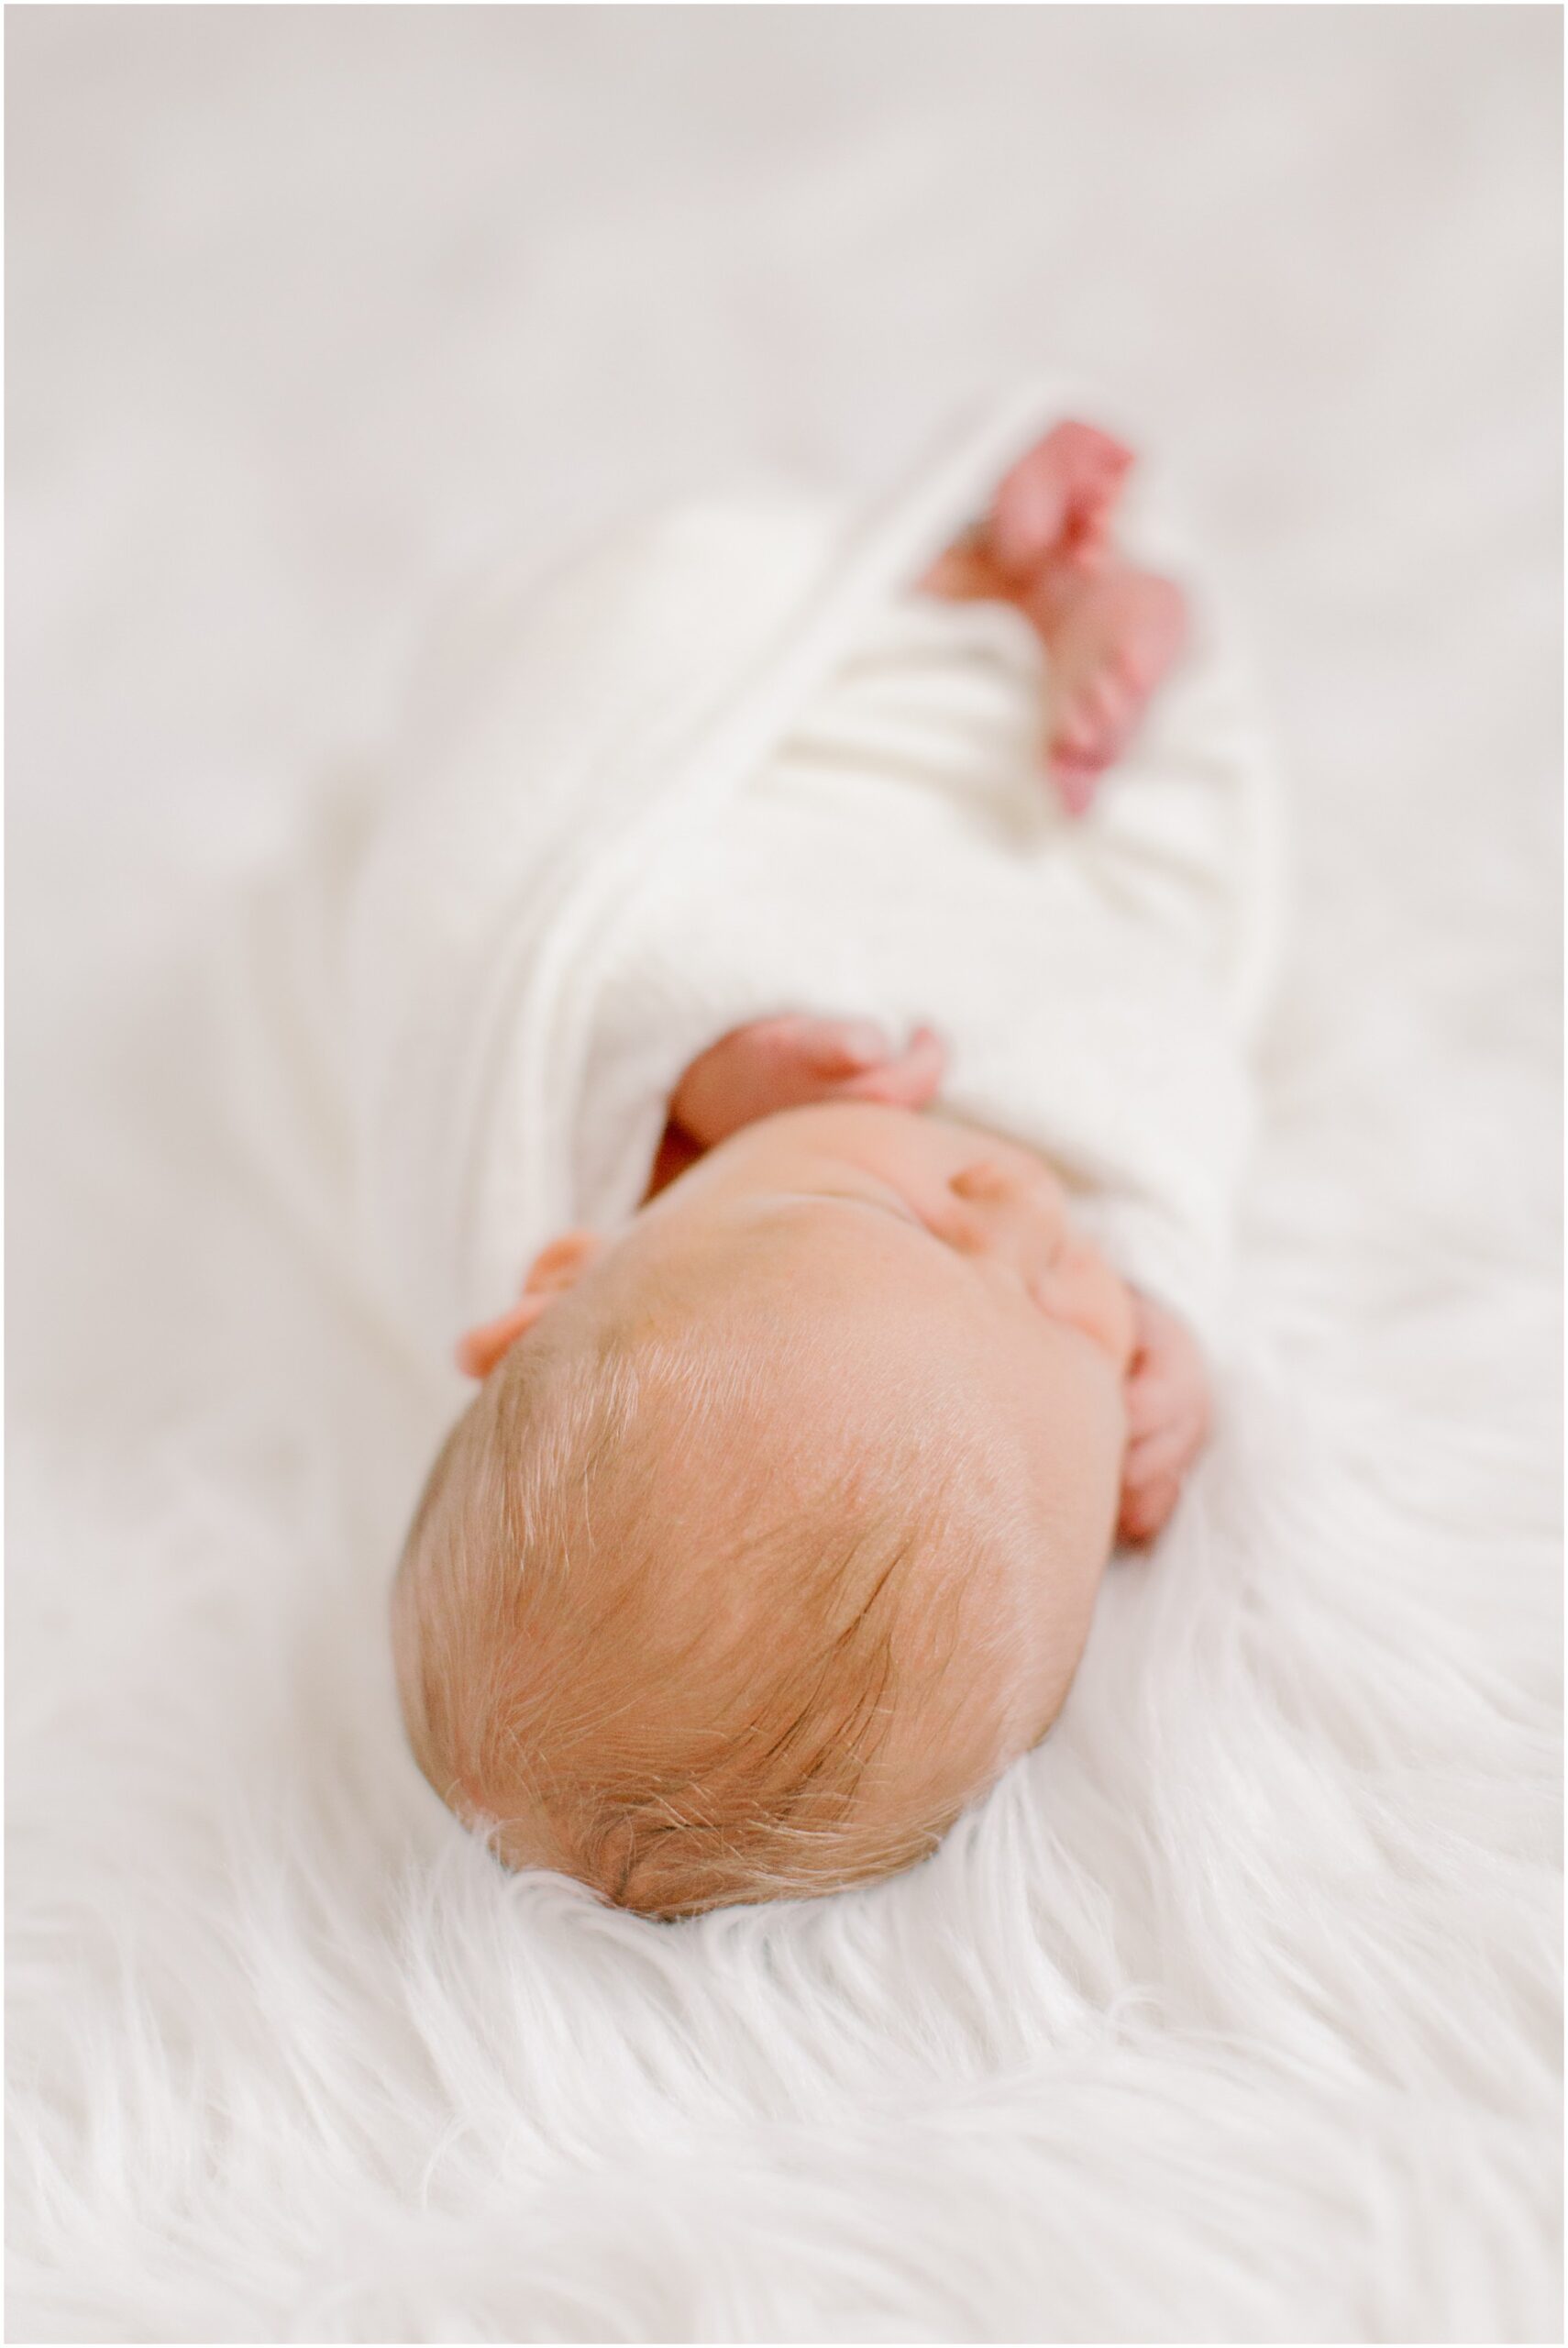 Details of a baby's hair in three tips for a successful newborn session